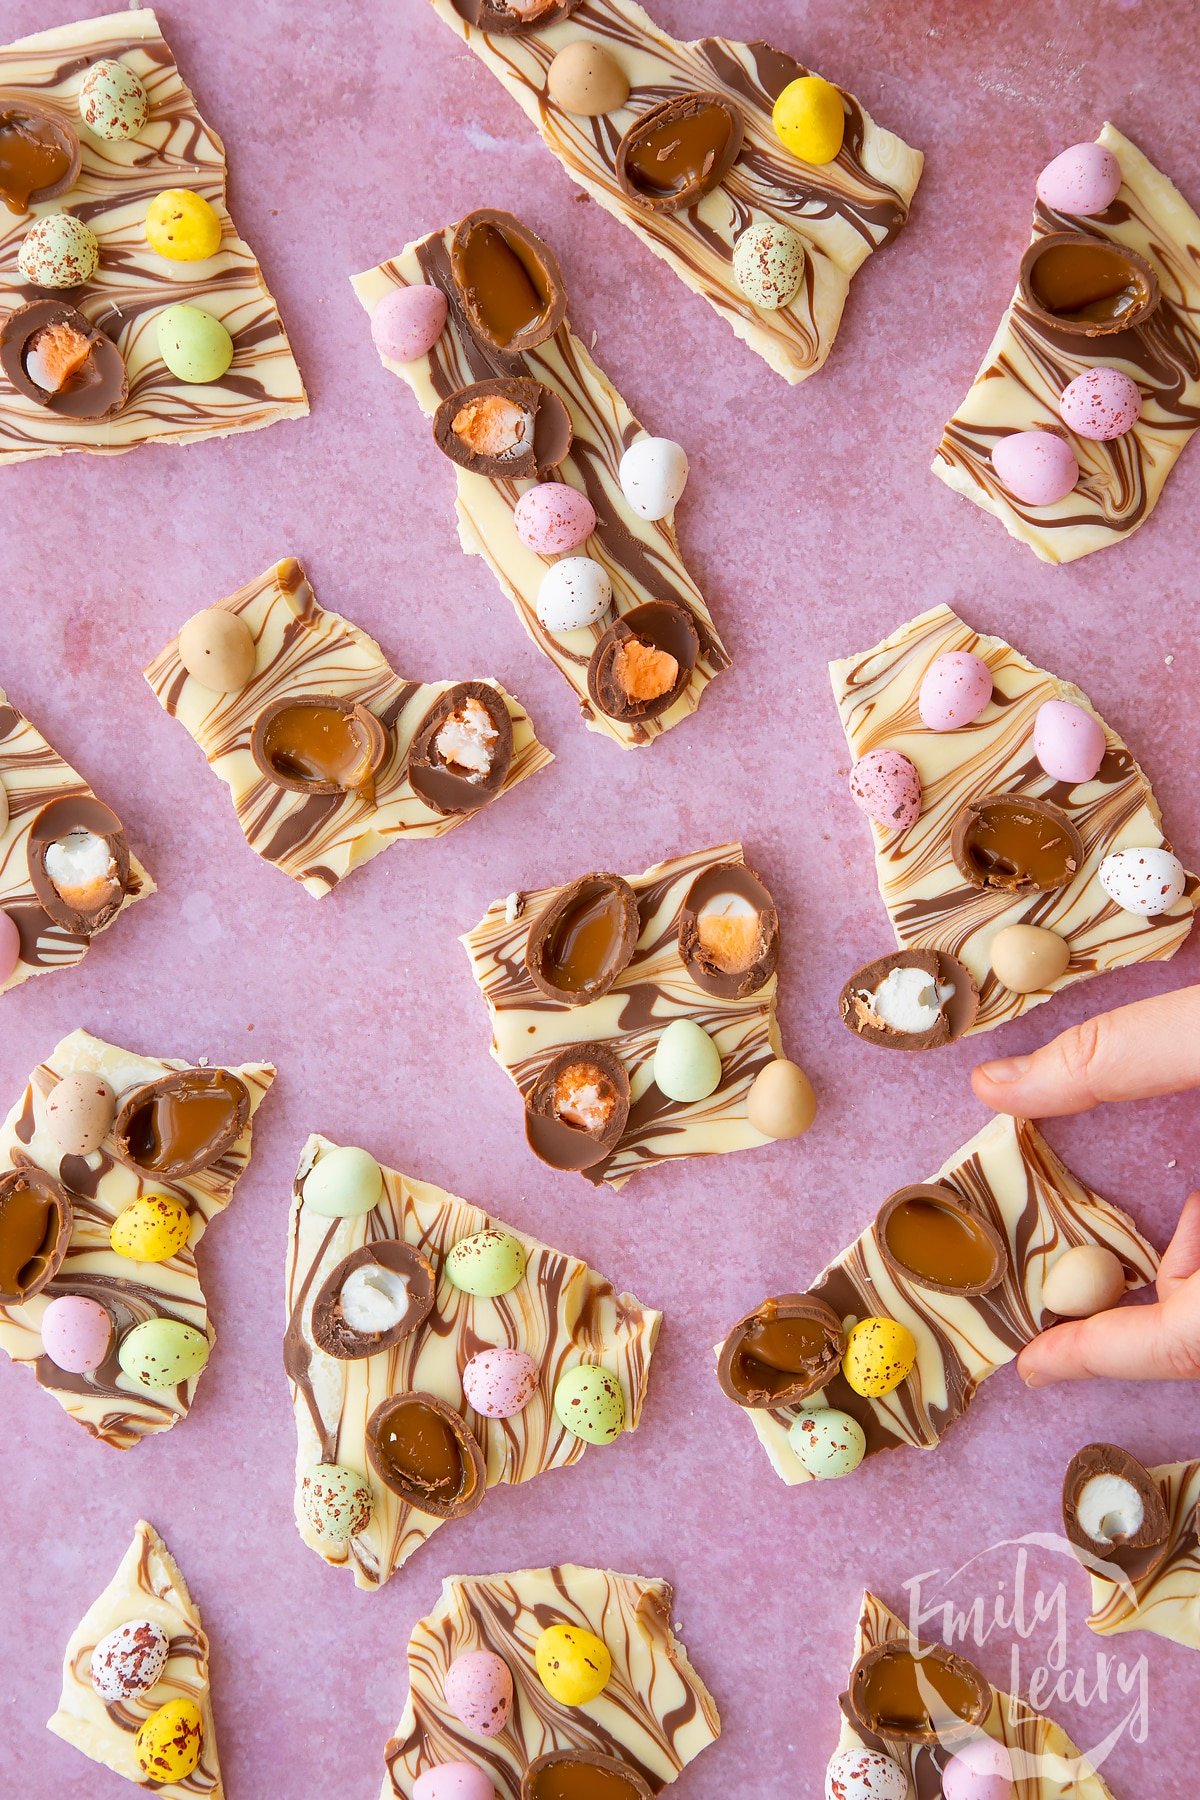 Finished pieces of Easter chocolate bark.